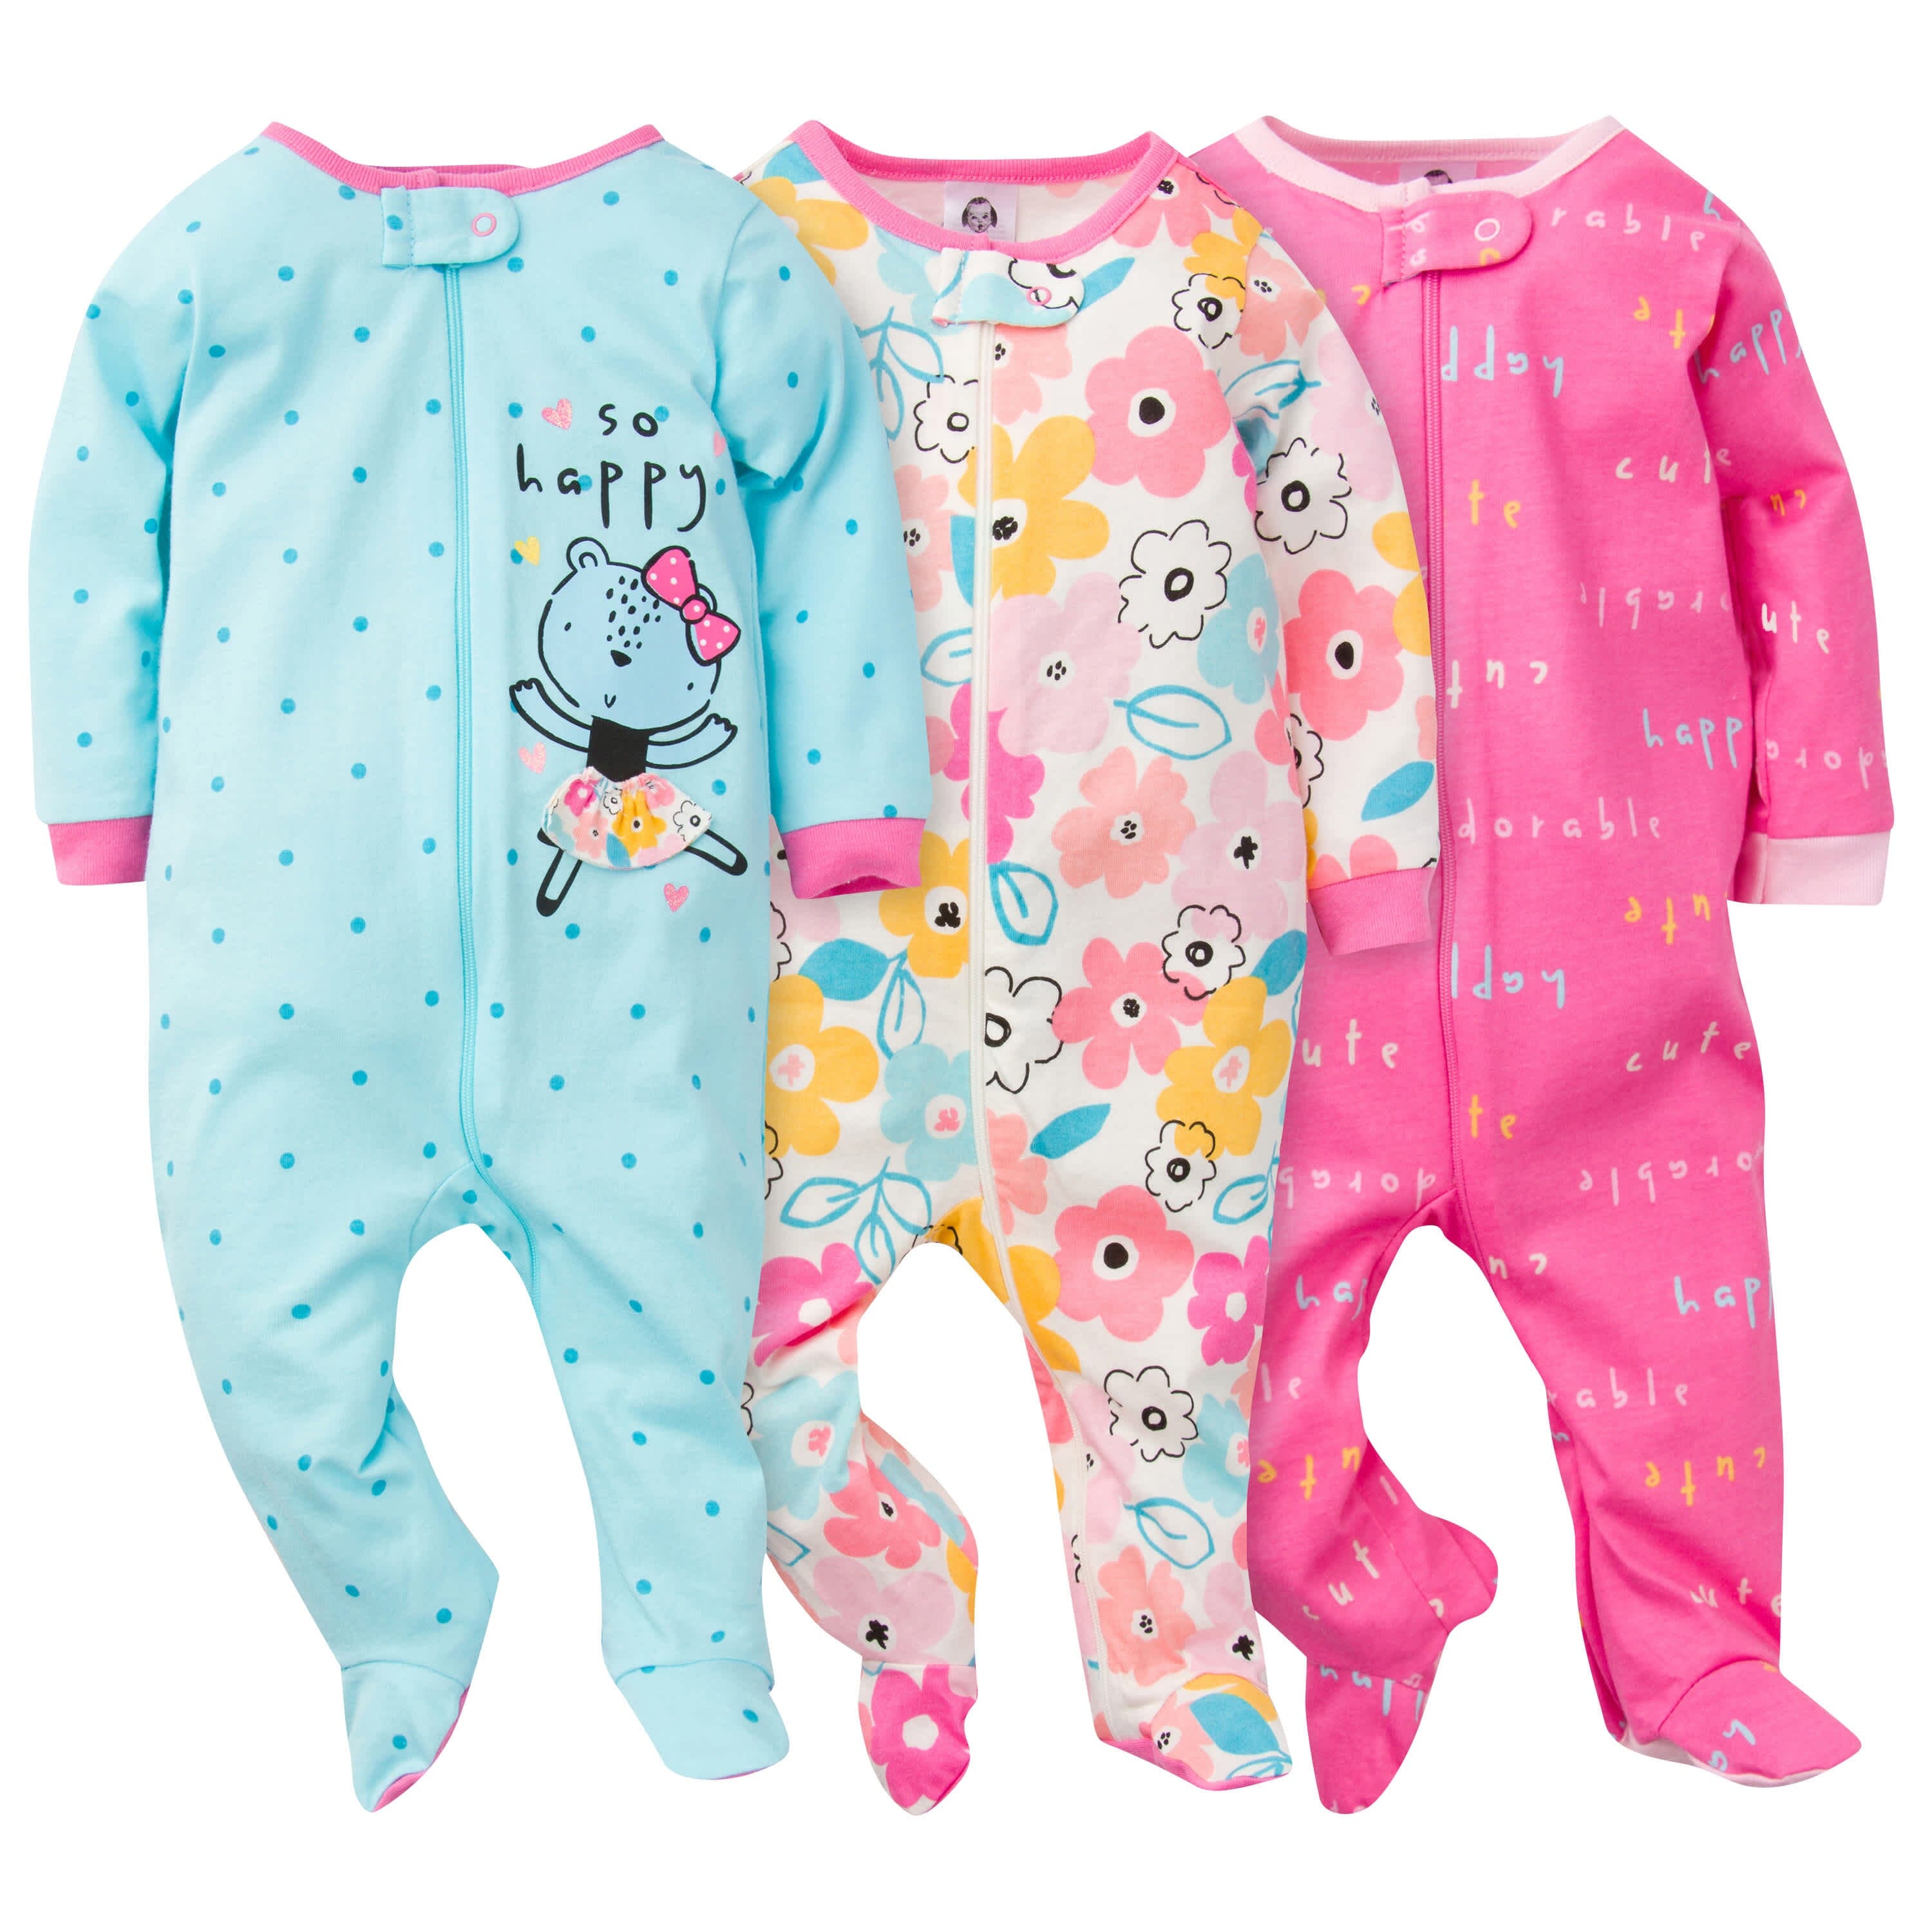 Gerber Childrenswear Affiliate Program: Everything You Need to